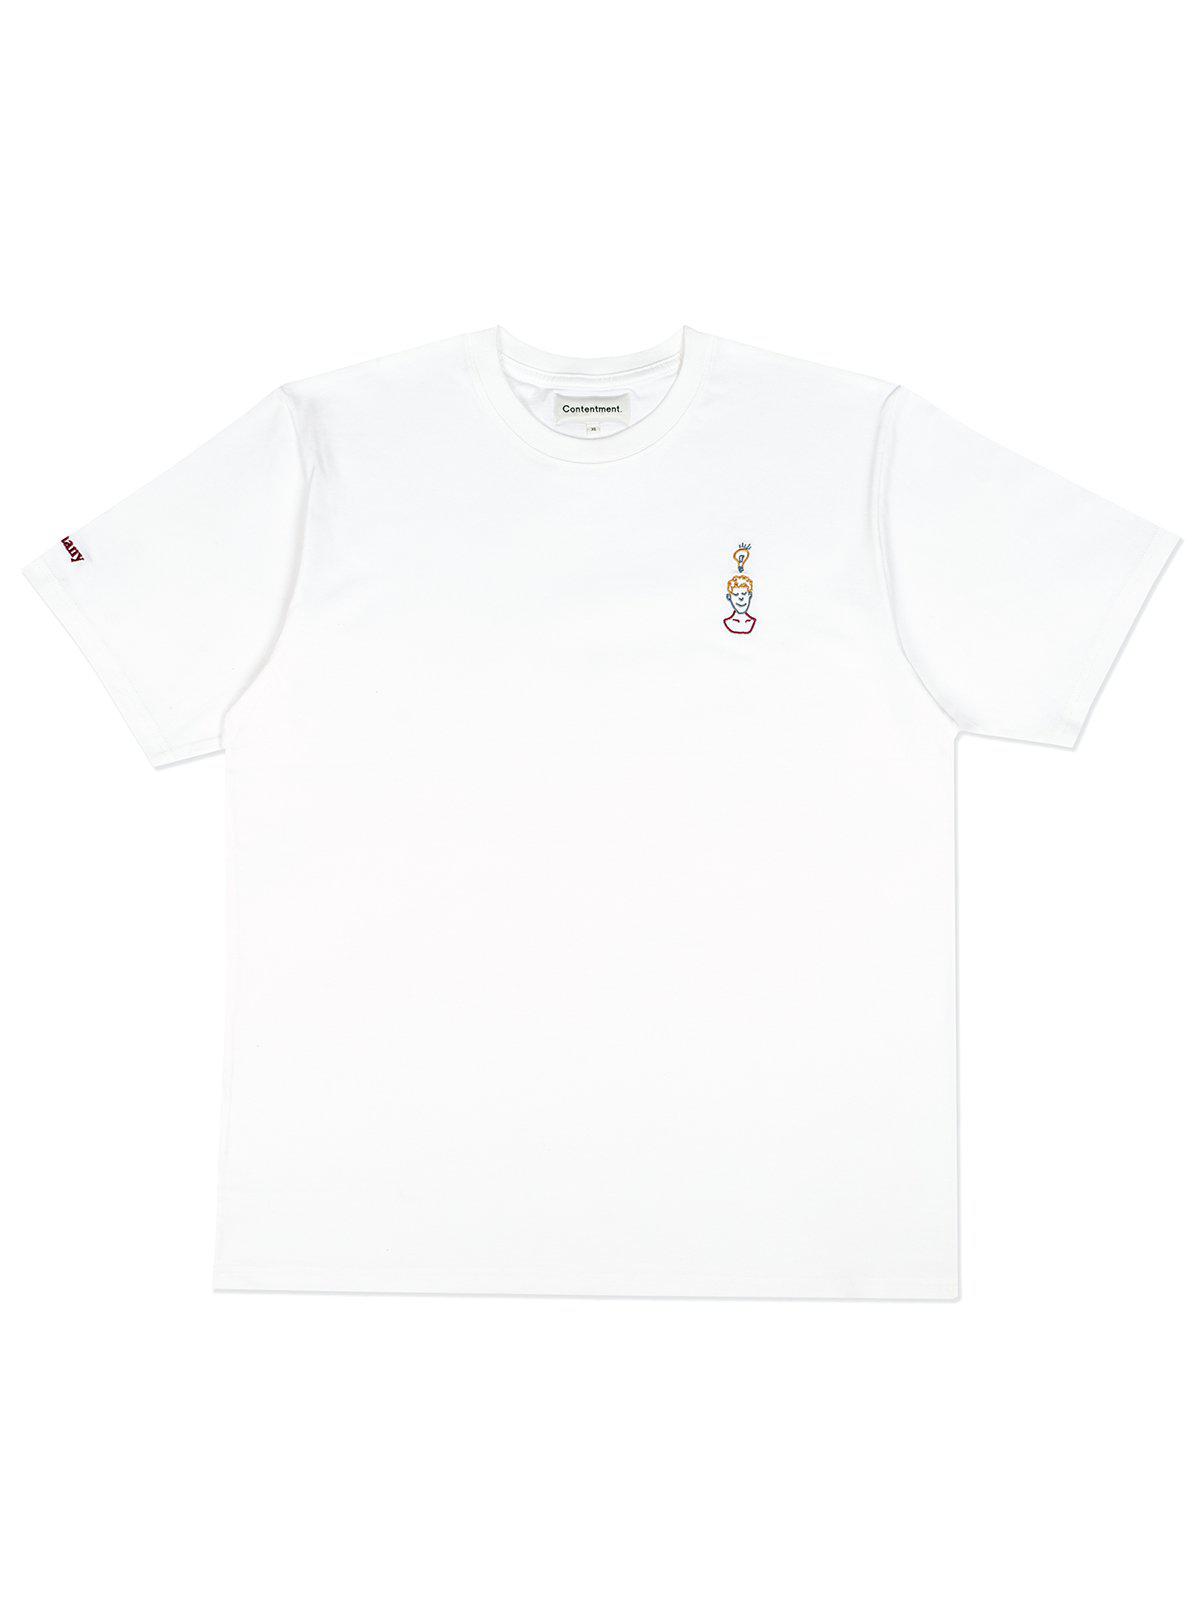 Contentment. EUREKA Embroidery T-Shirt White - MORE by Morello Indonesia